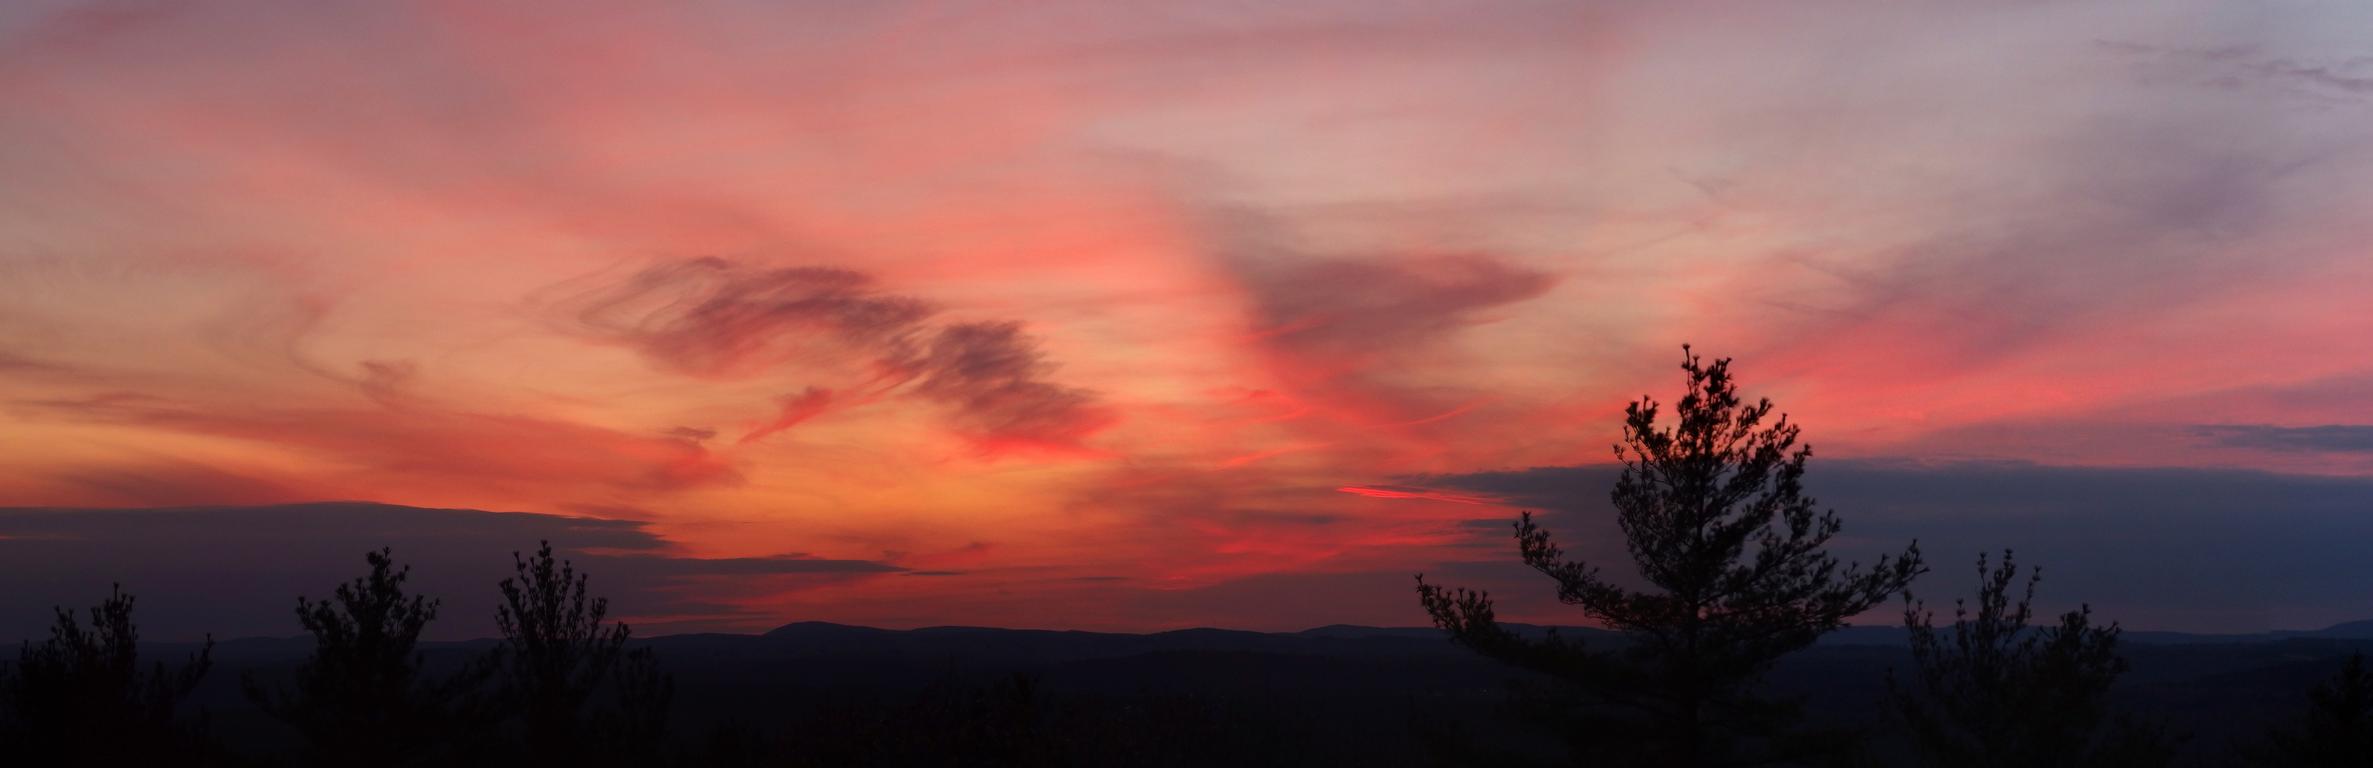 sunset in November as seen from the firetower atop Federal Hill in southern New Hampshire